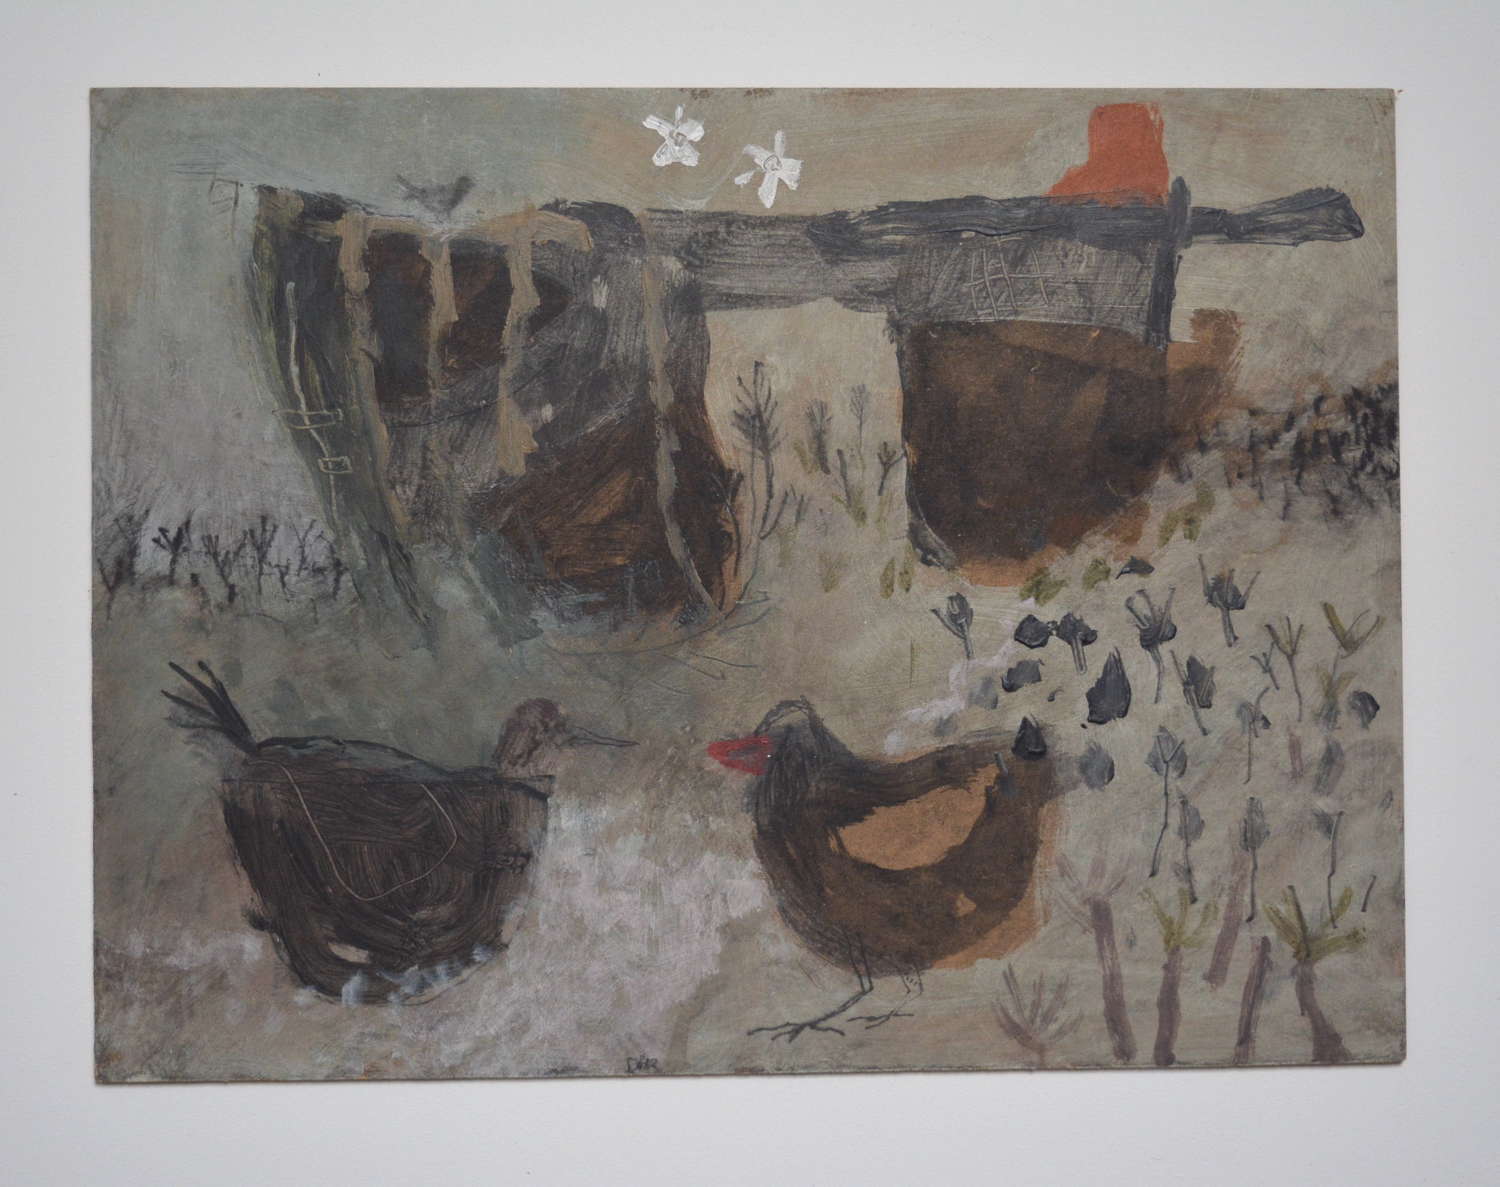 CHICKENS BY DAVID PEARCE